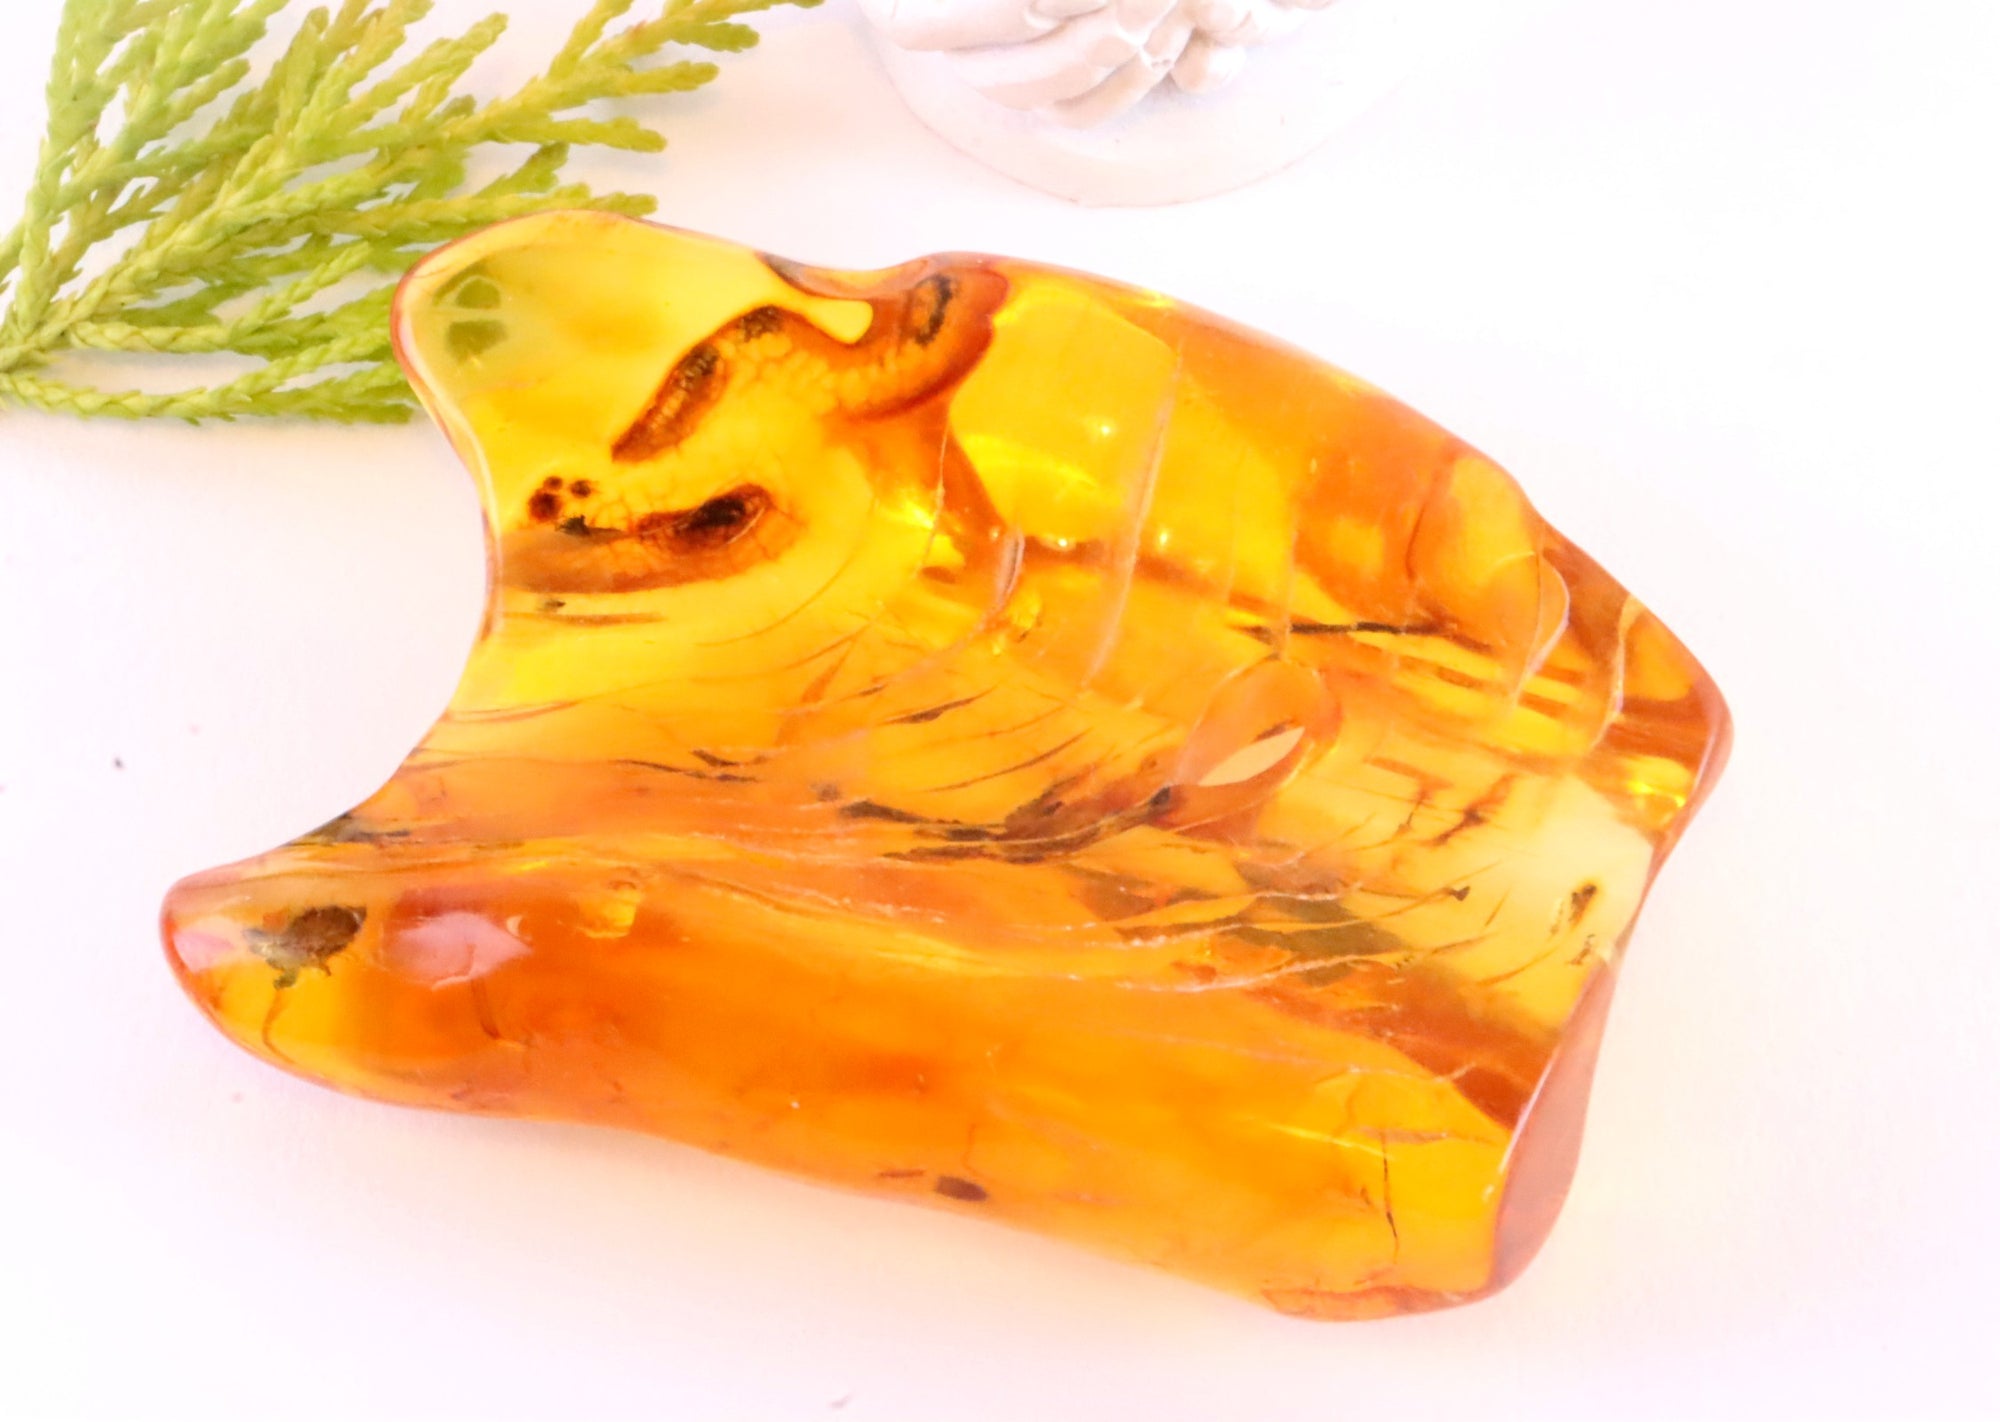 Clear 40 Million year Old Baltic Amber Museum Collector's gem with Insect Inclusion